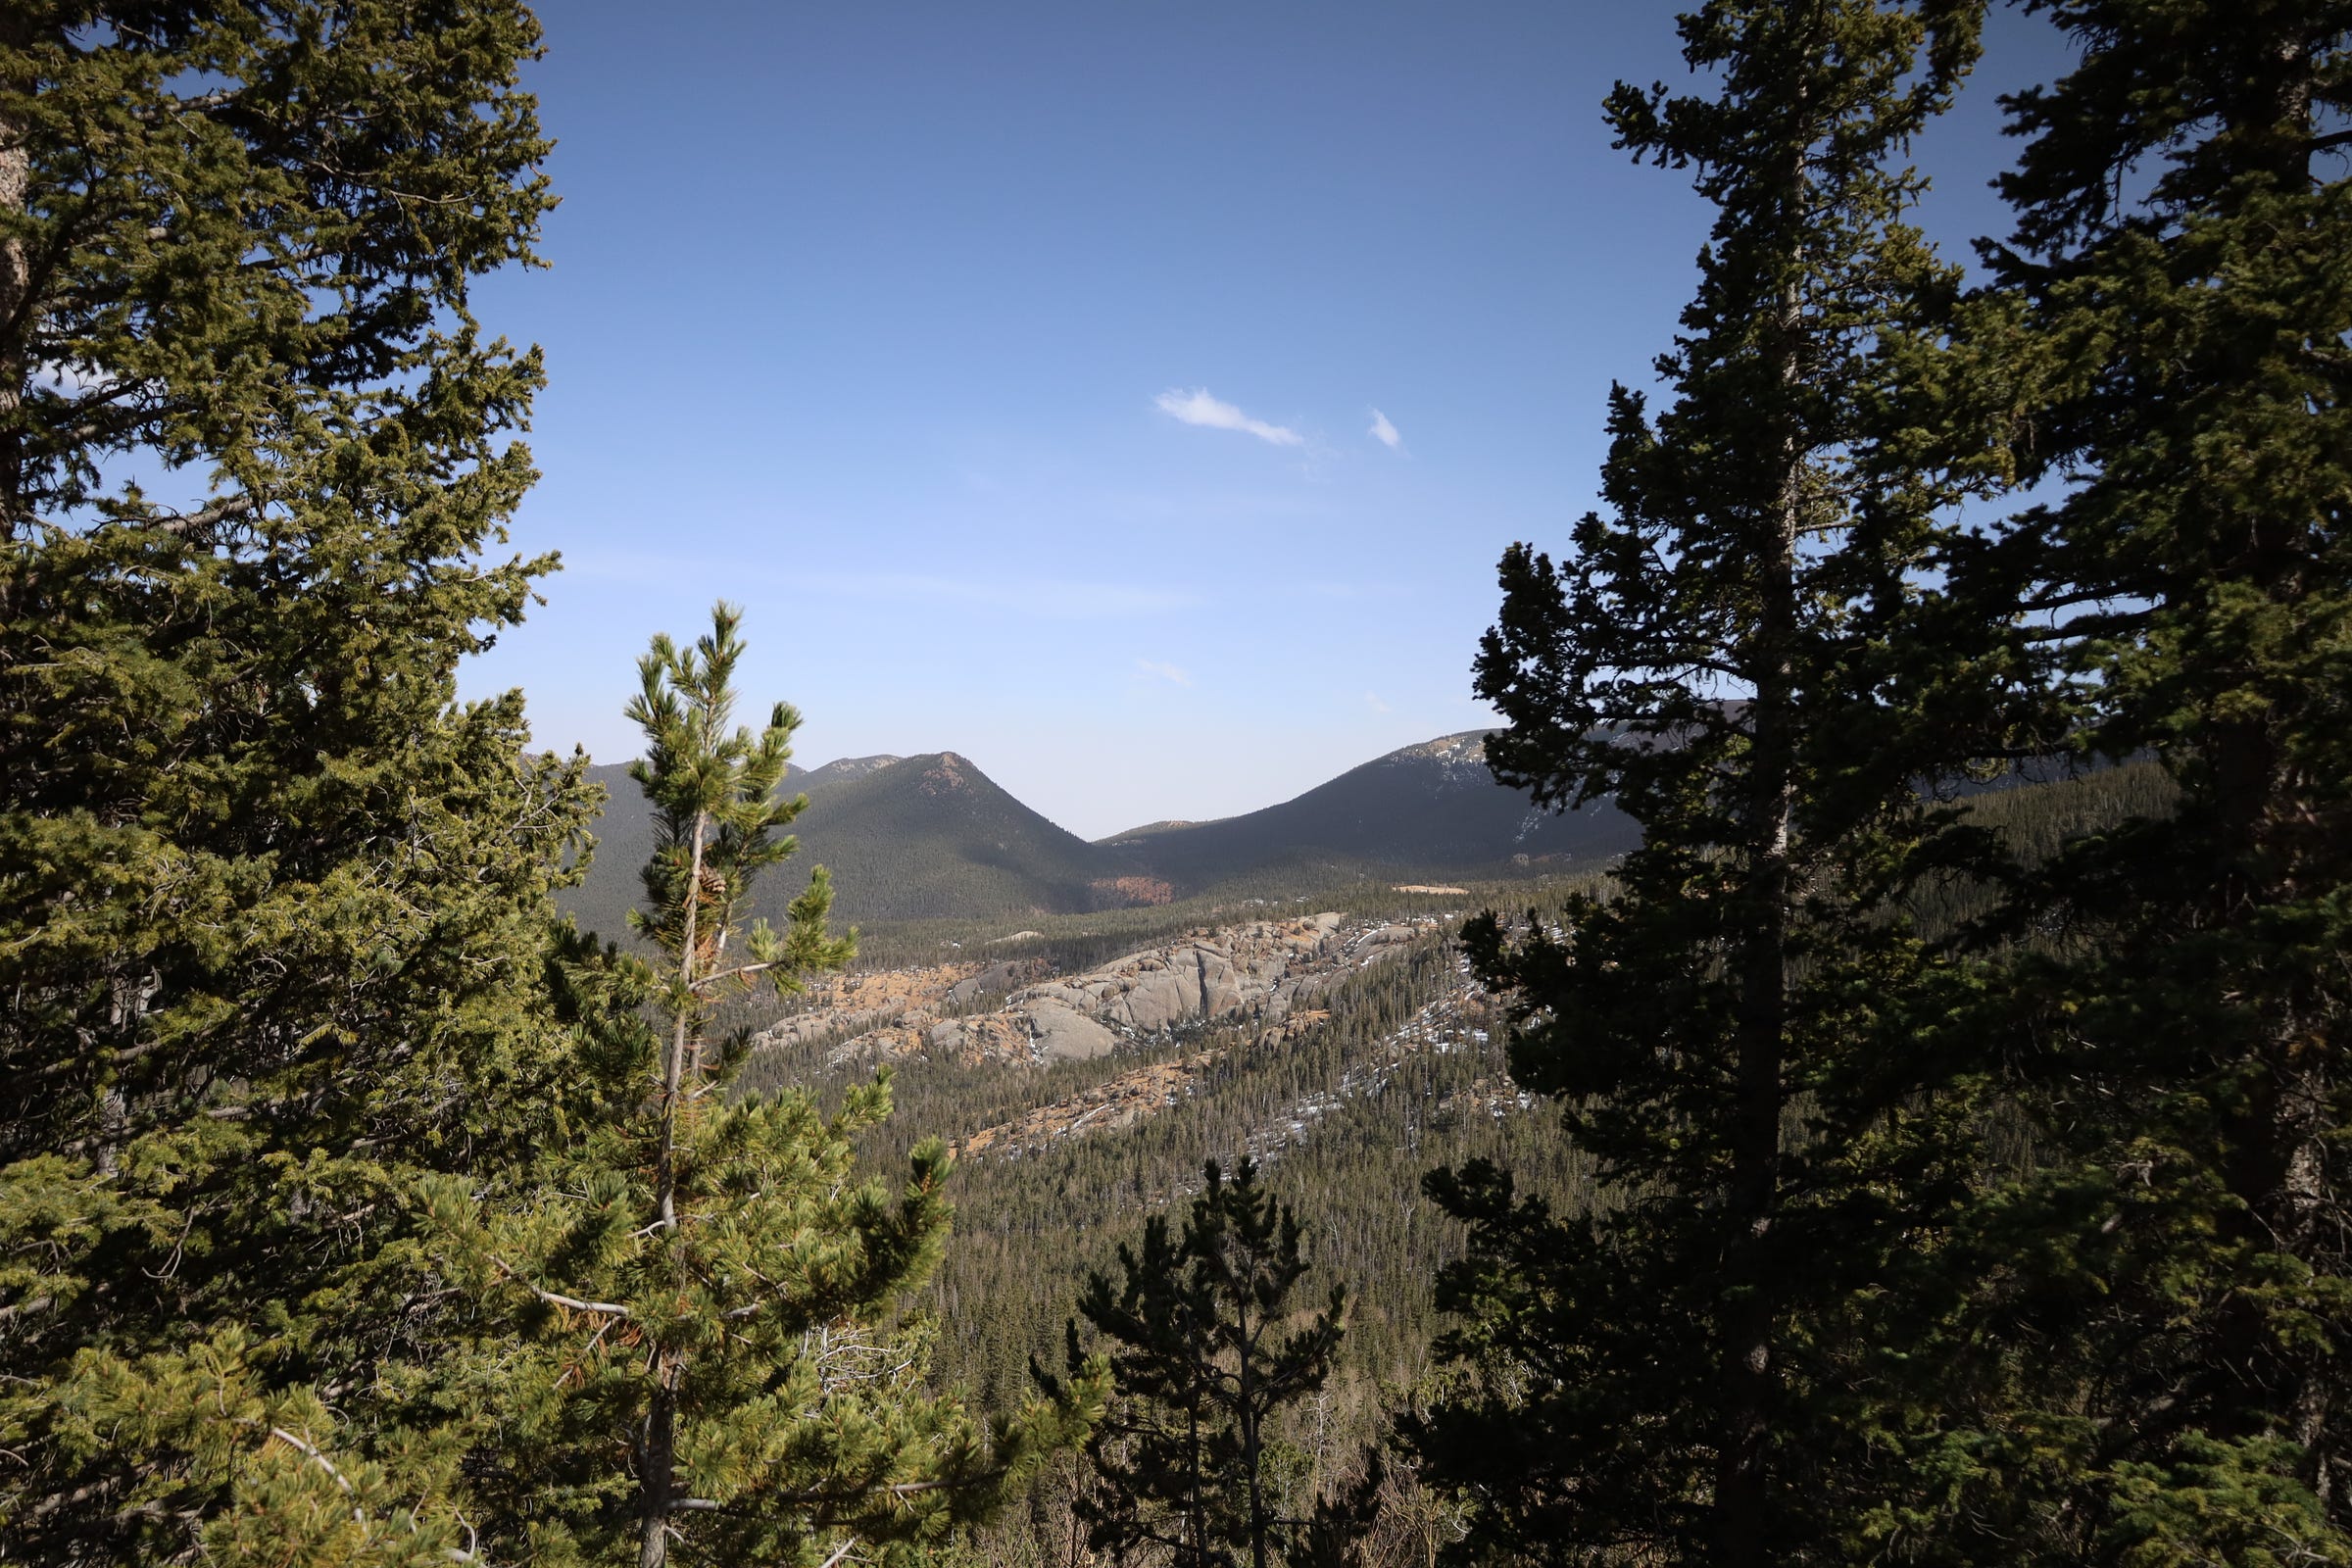 Pine trees frame a wide open mountain view, with a boulder field in the distance